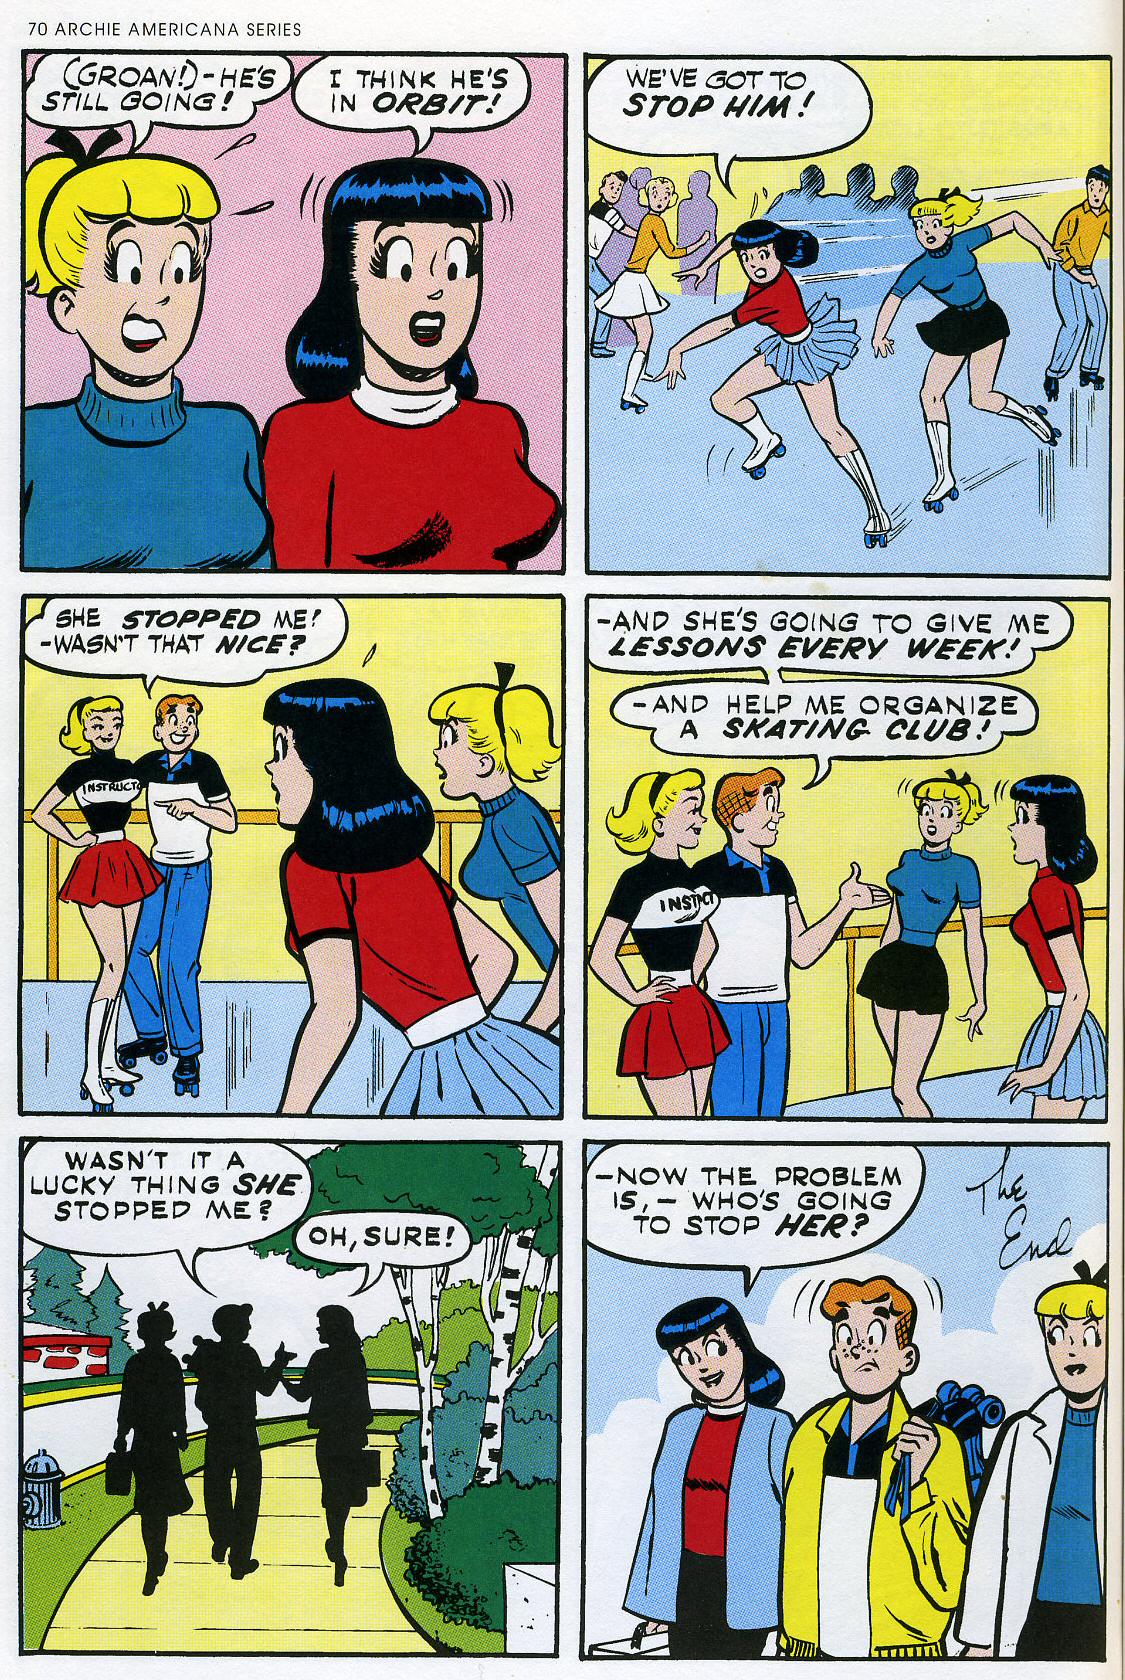 Read online Archie Americana Series comic -  Issue # TPB 2 - 72